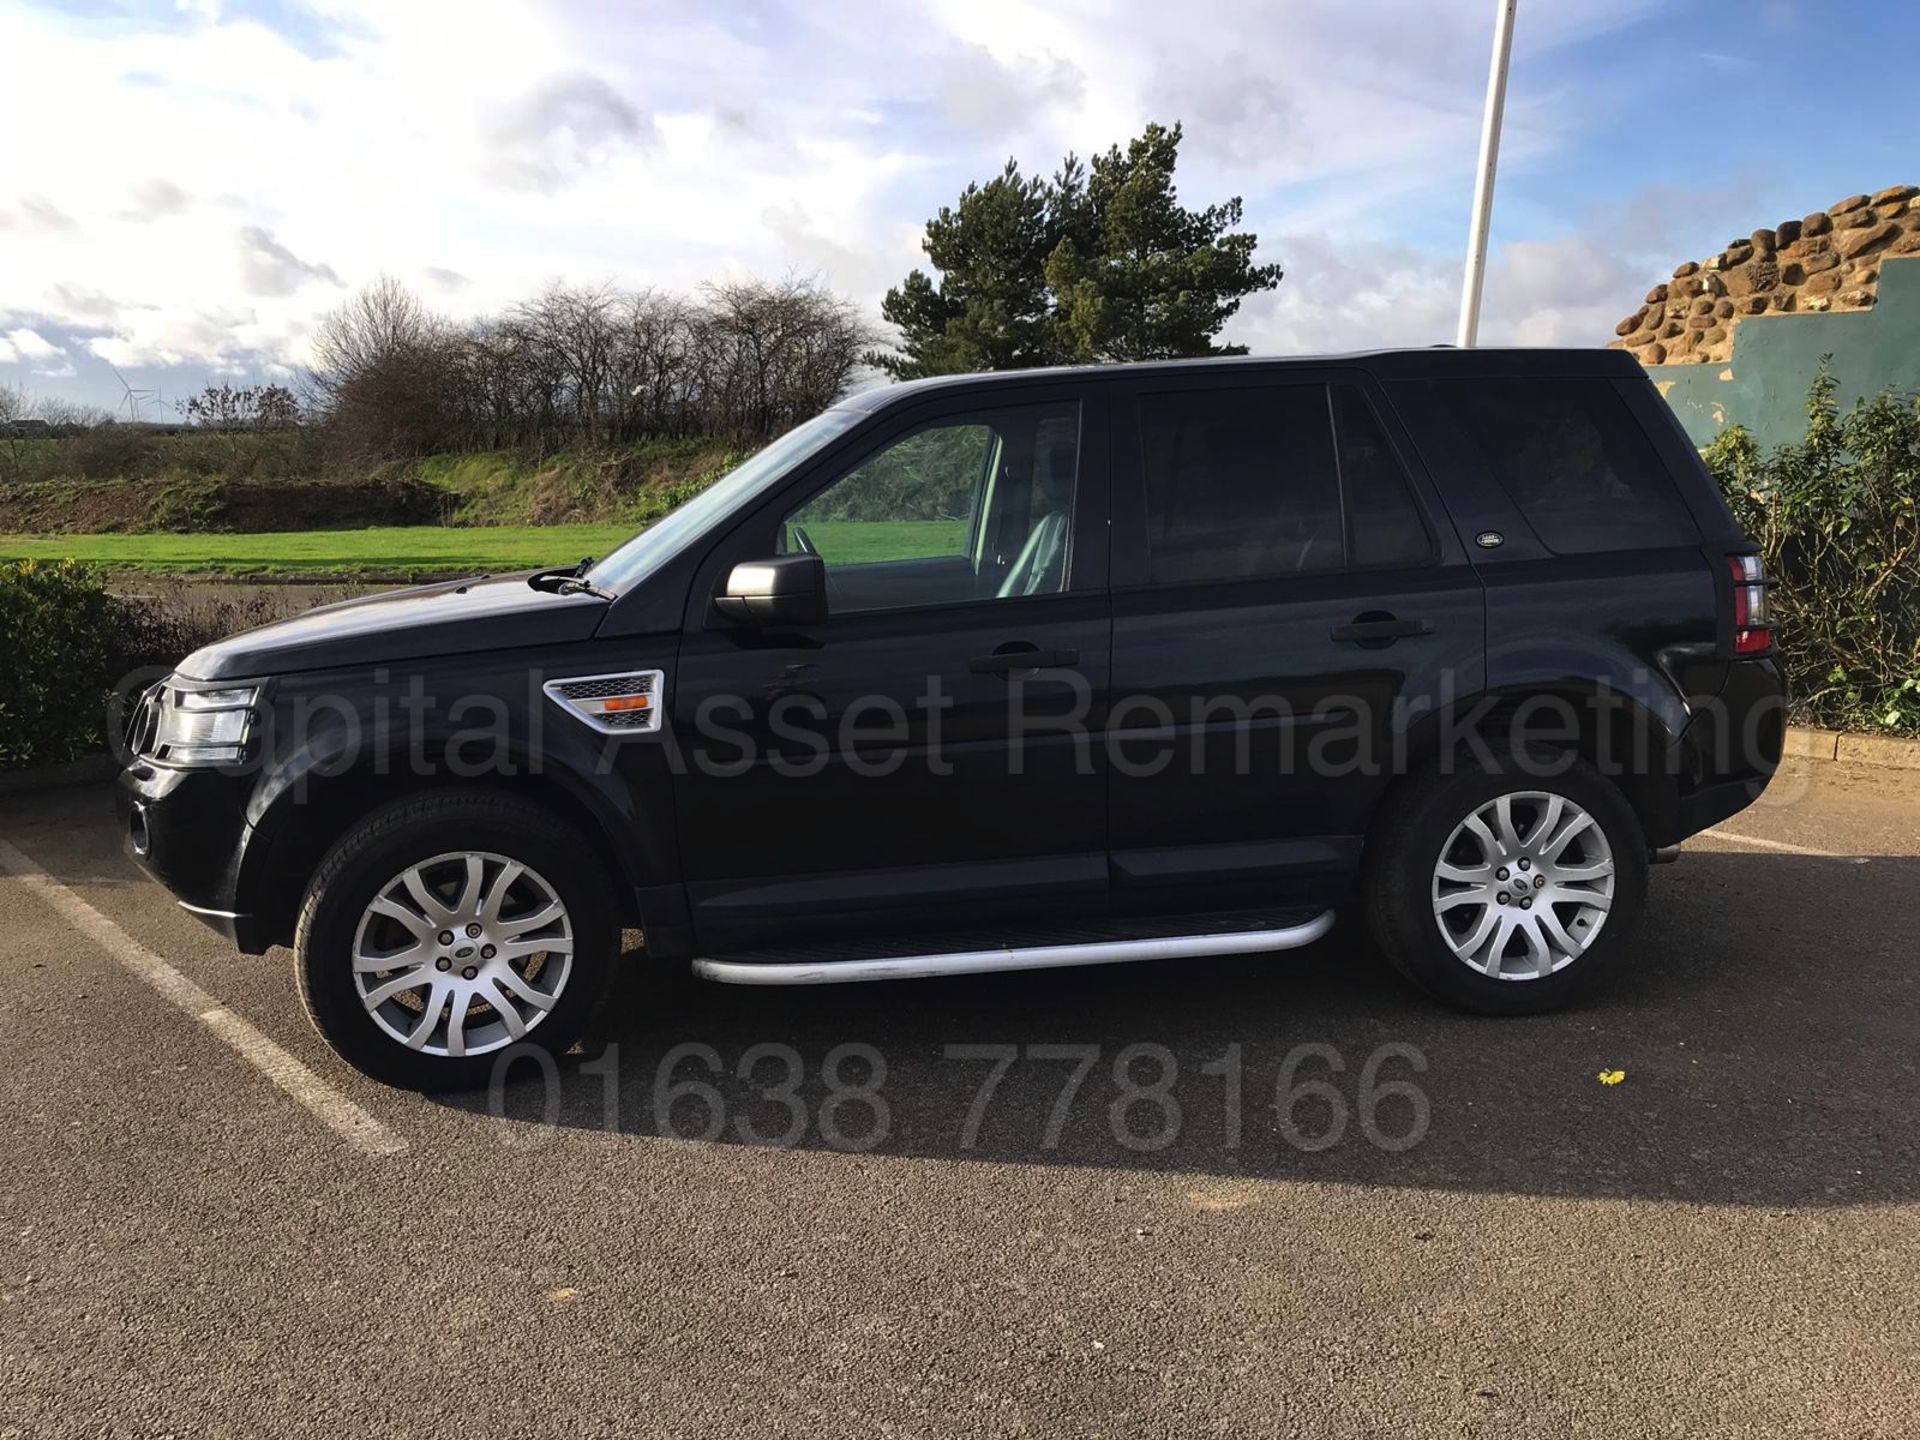 On Sale LAND ROVER FREELANDER "HSE" AUTO (2007) FULLY LOADED - SAT NAV -LEATHER ELECTRIC EVERYTHING - Bild 2 aus 25